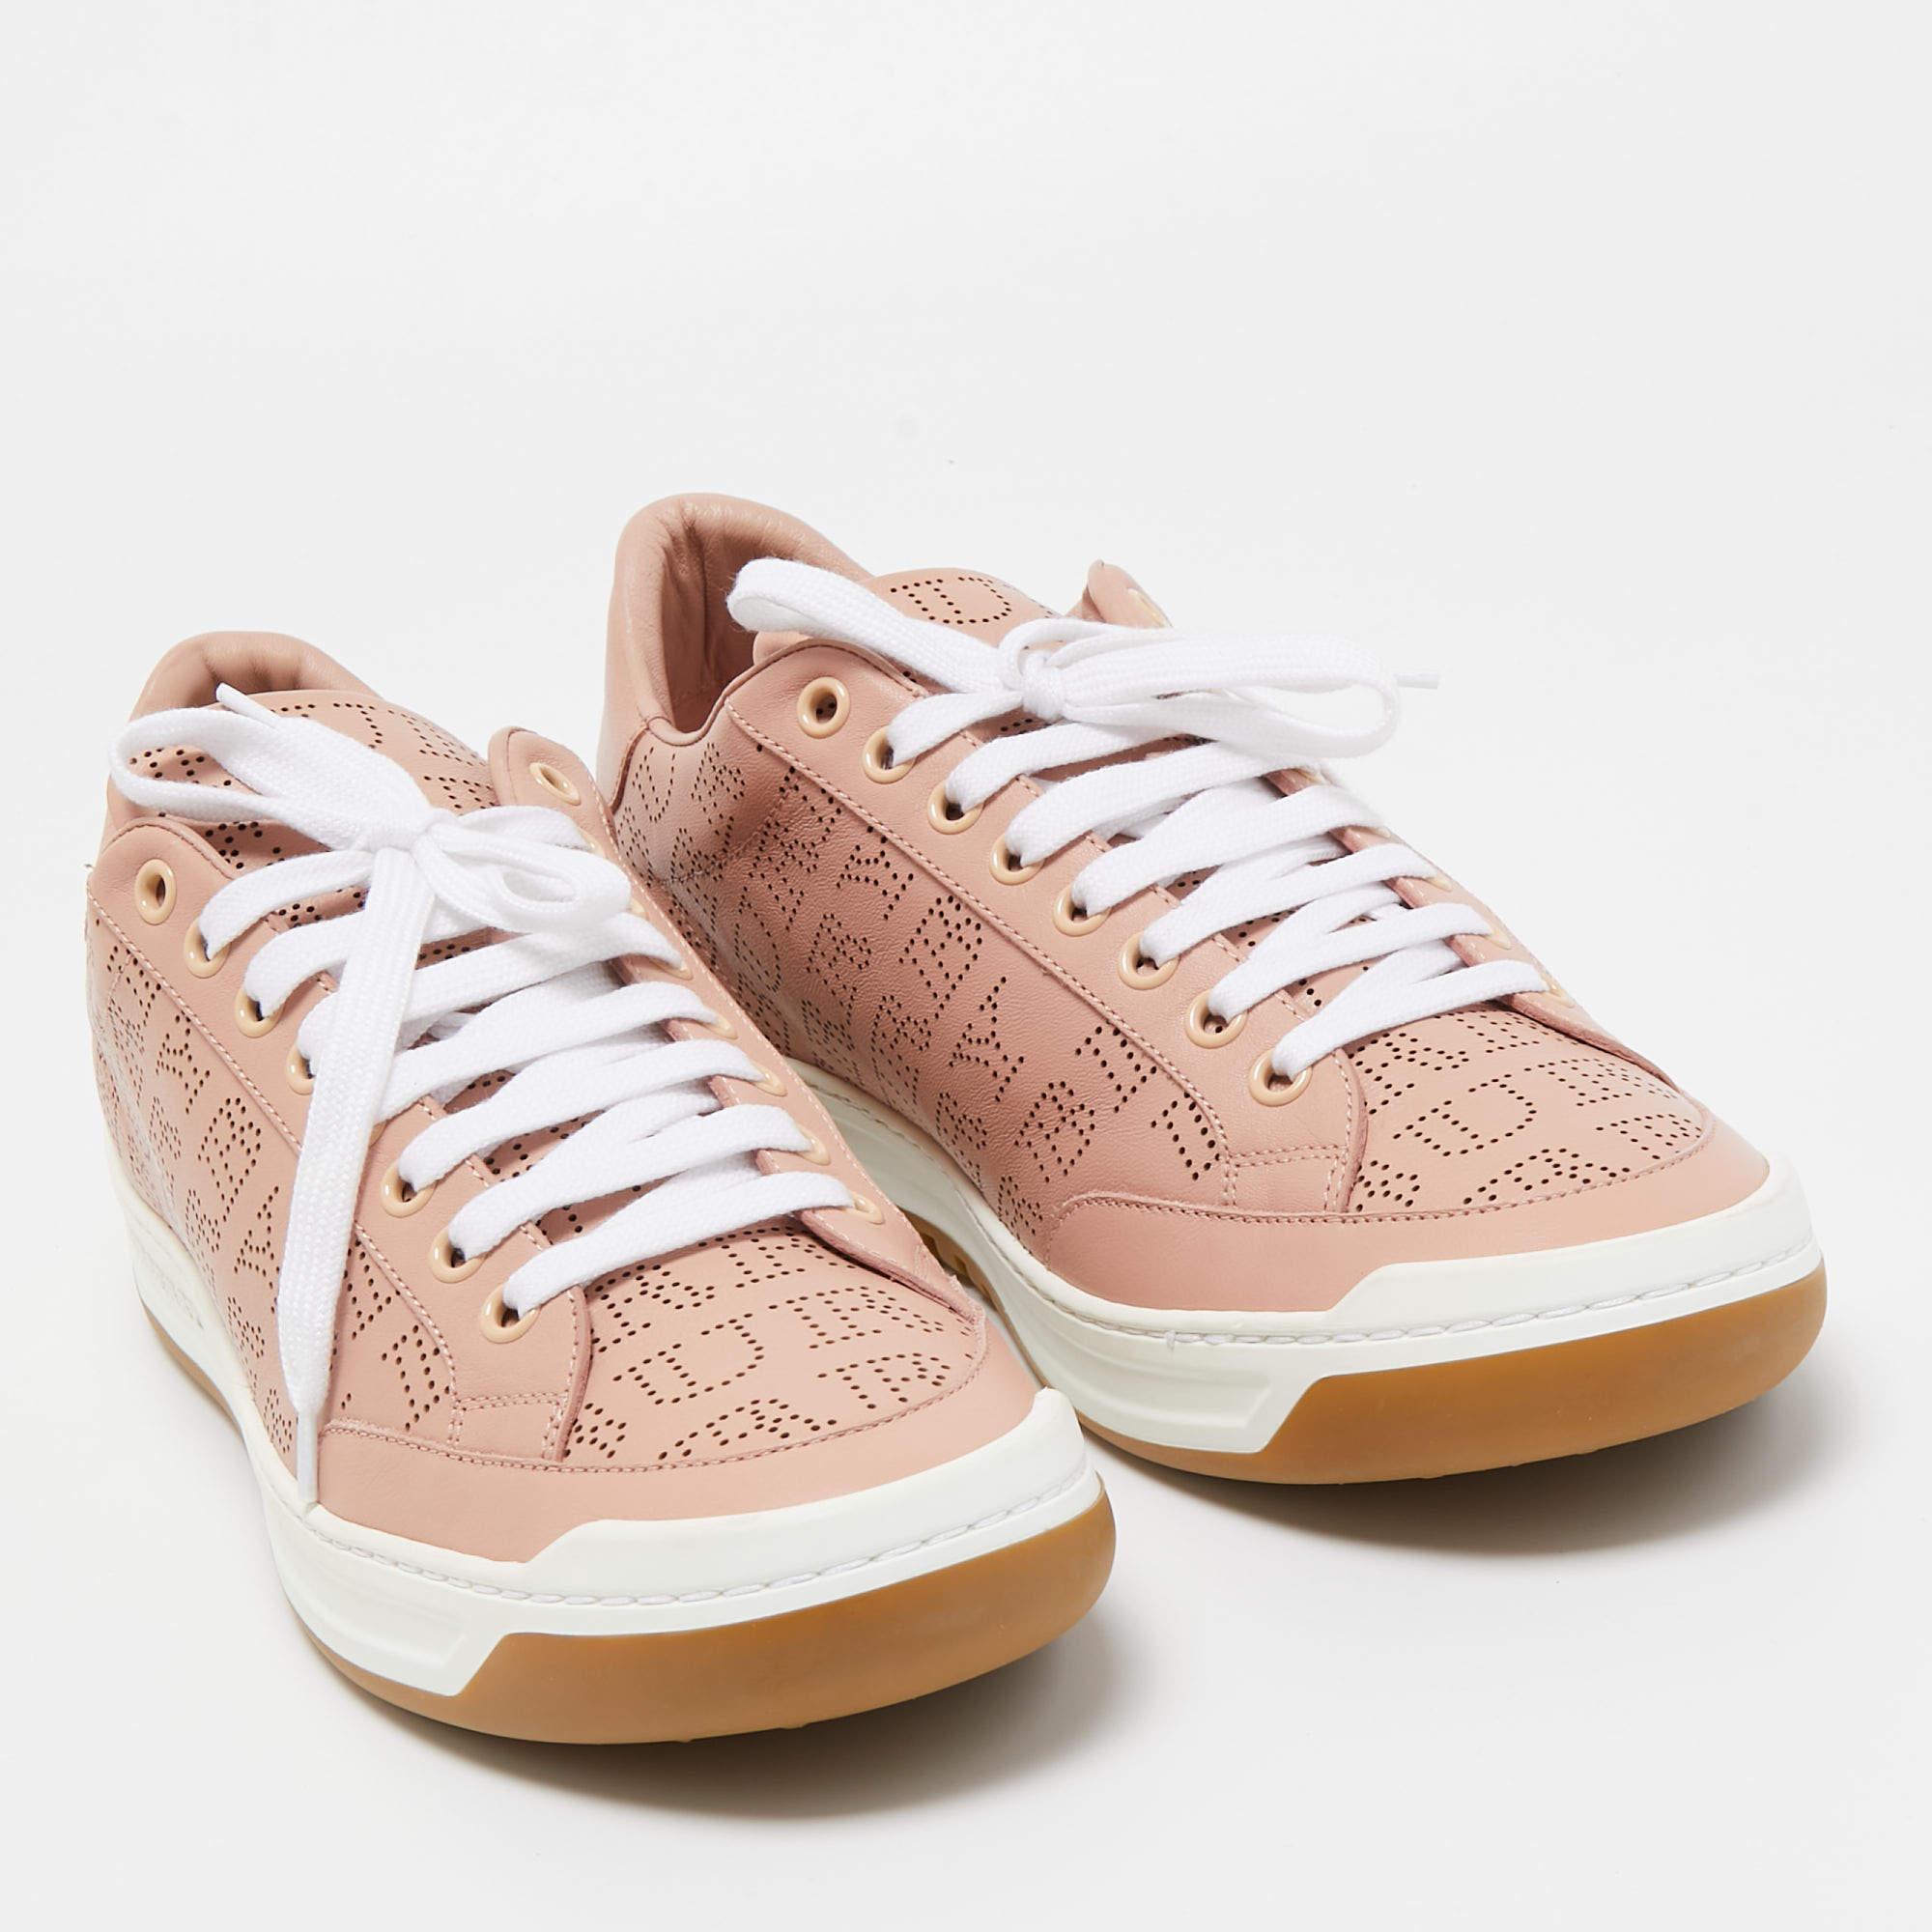  Baskets basses Westford roses Burberry, taille 41 Pour femmes 